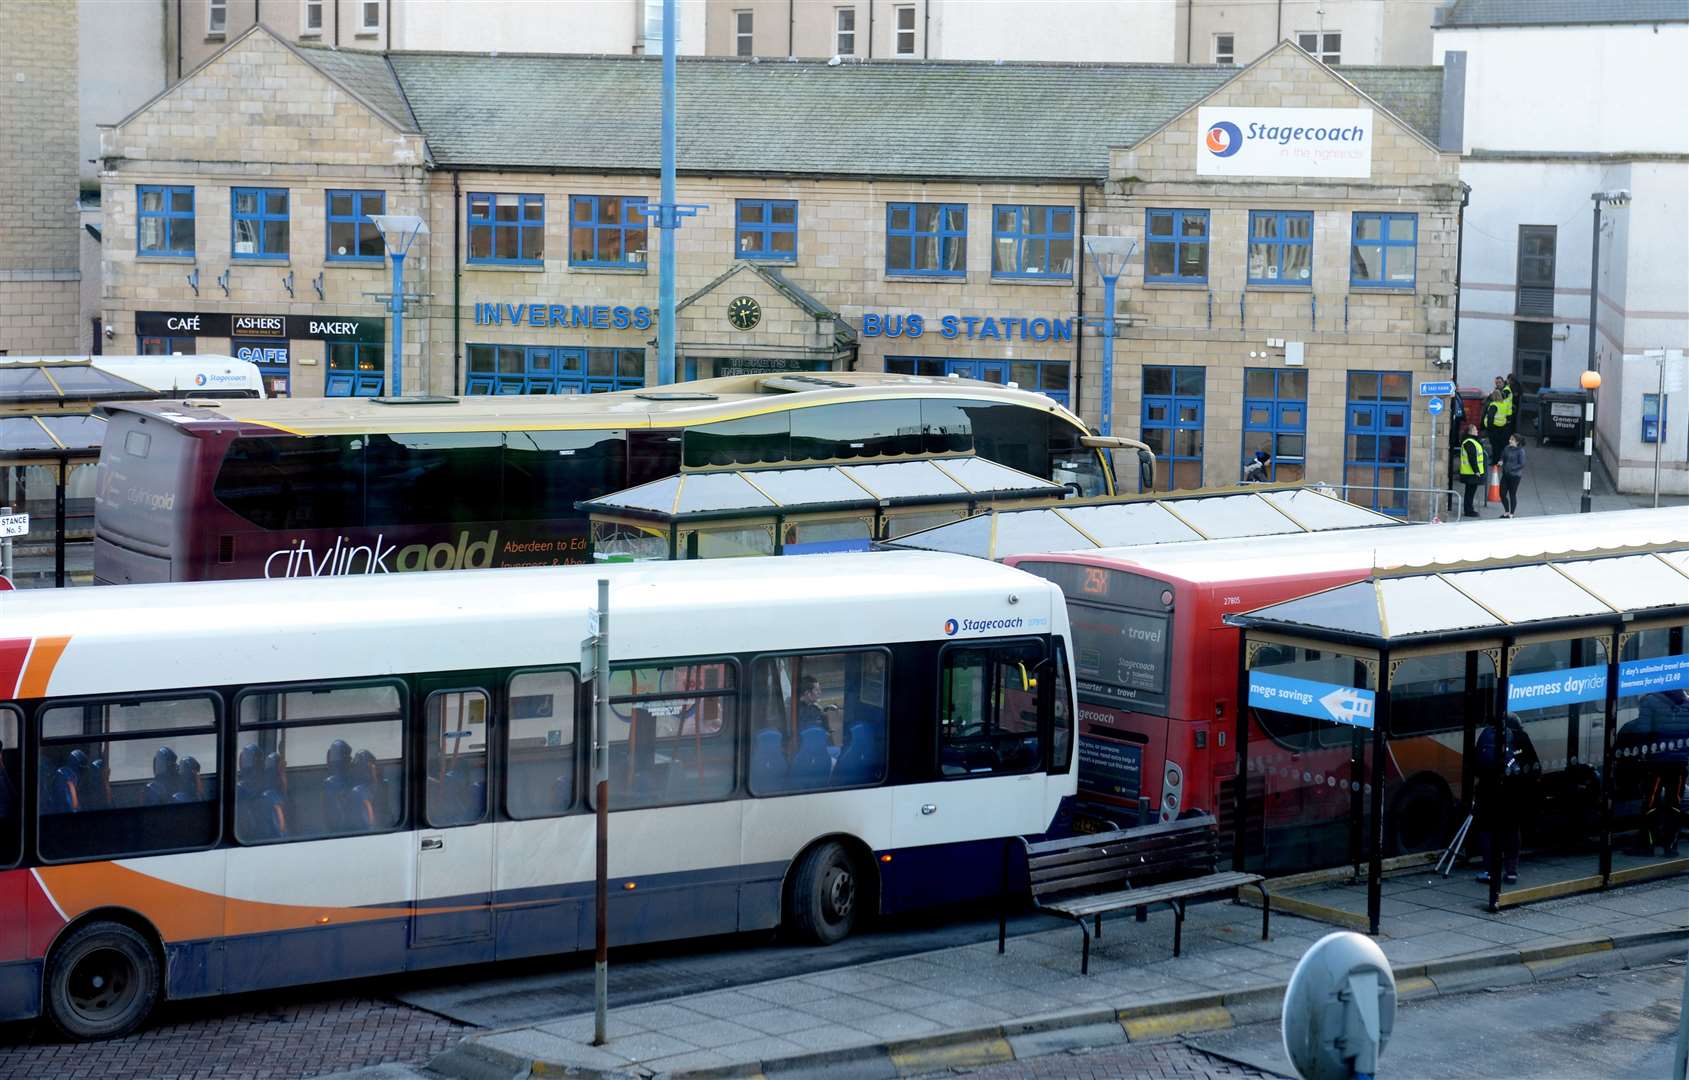 Support has been promised for Scotland's bus services.